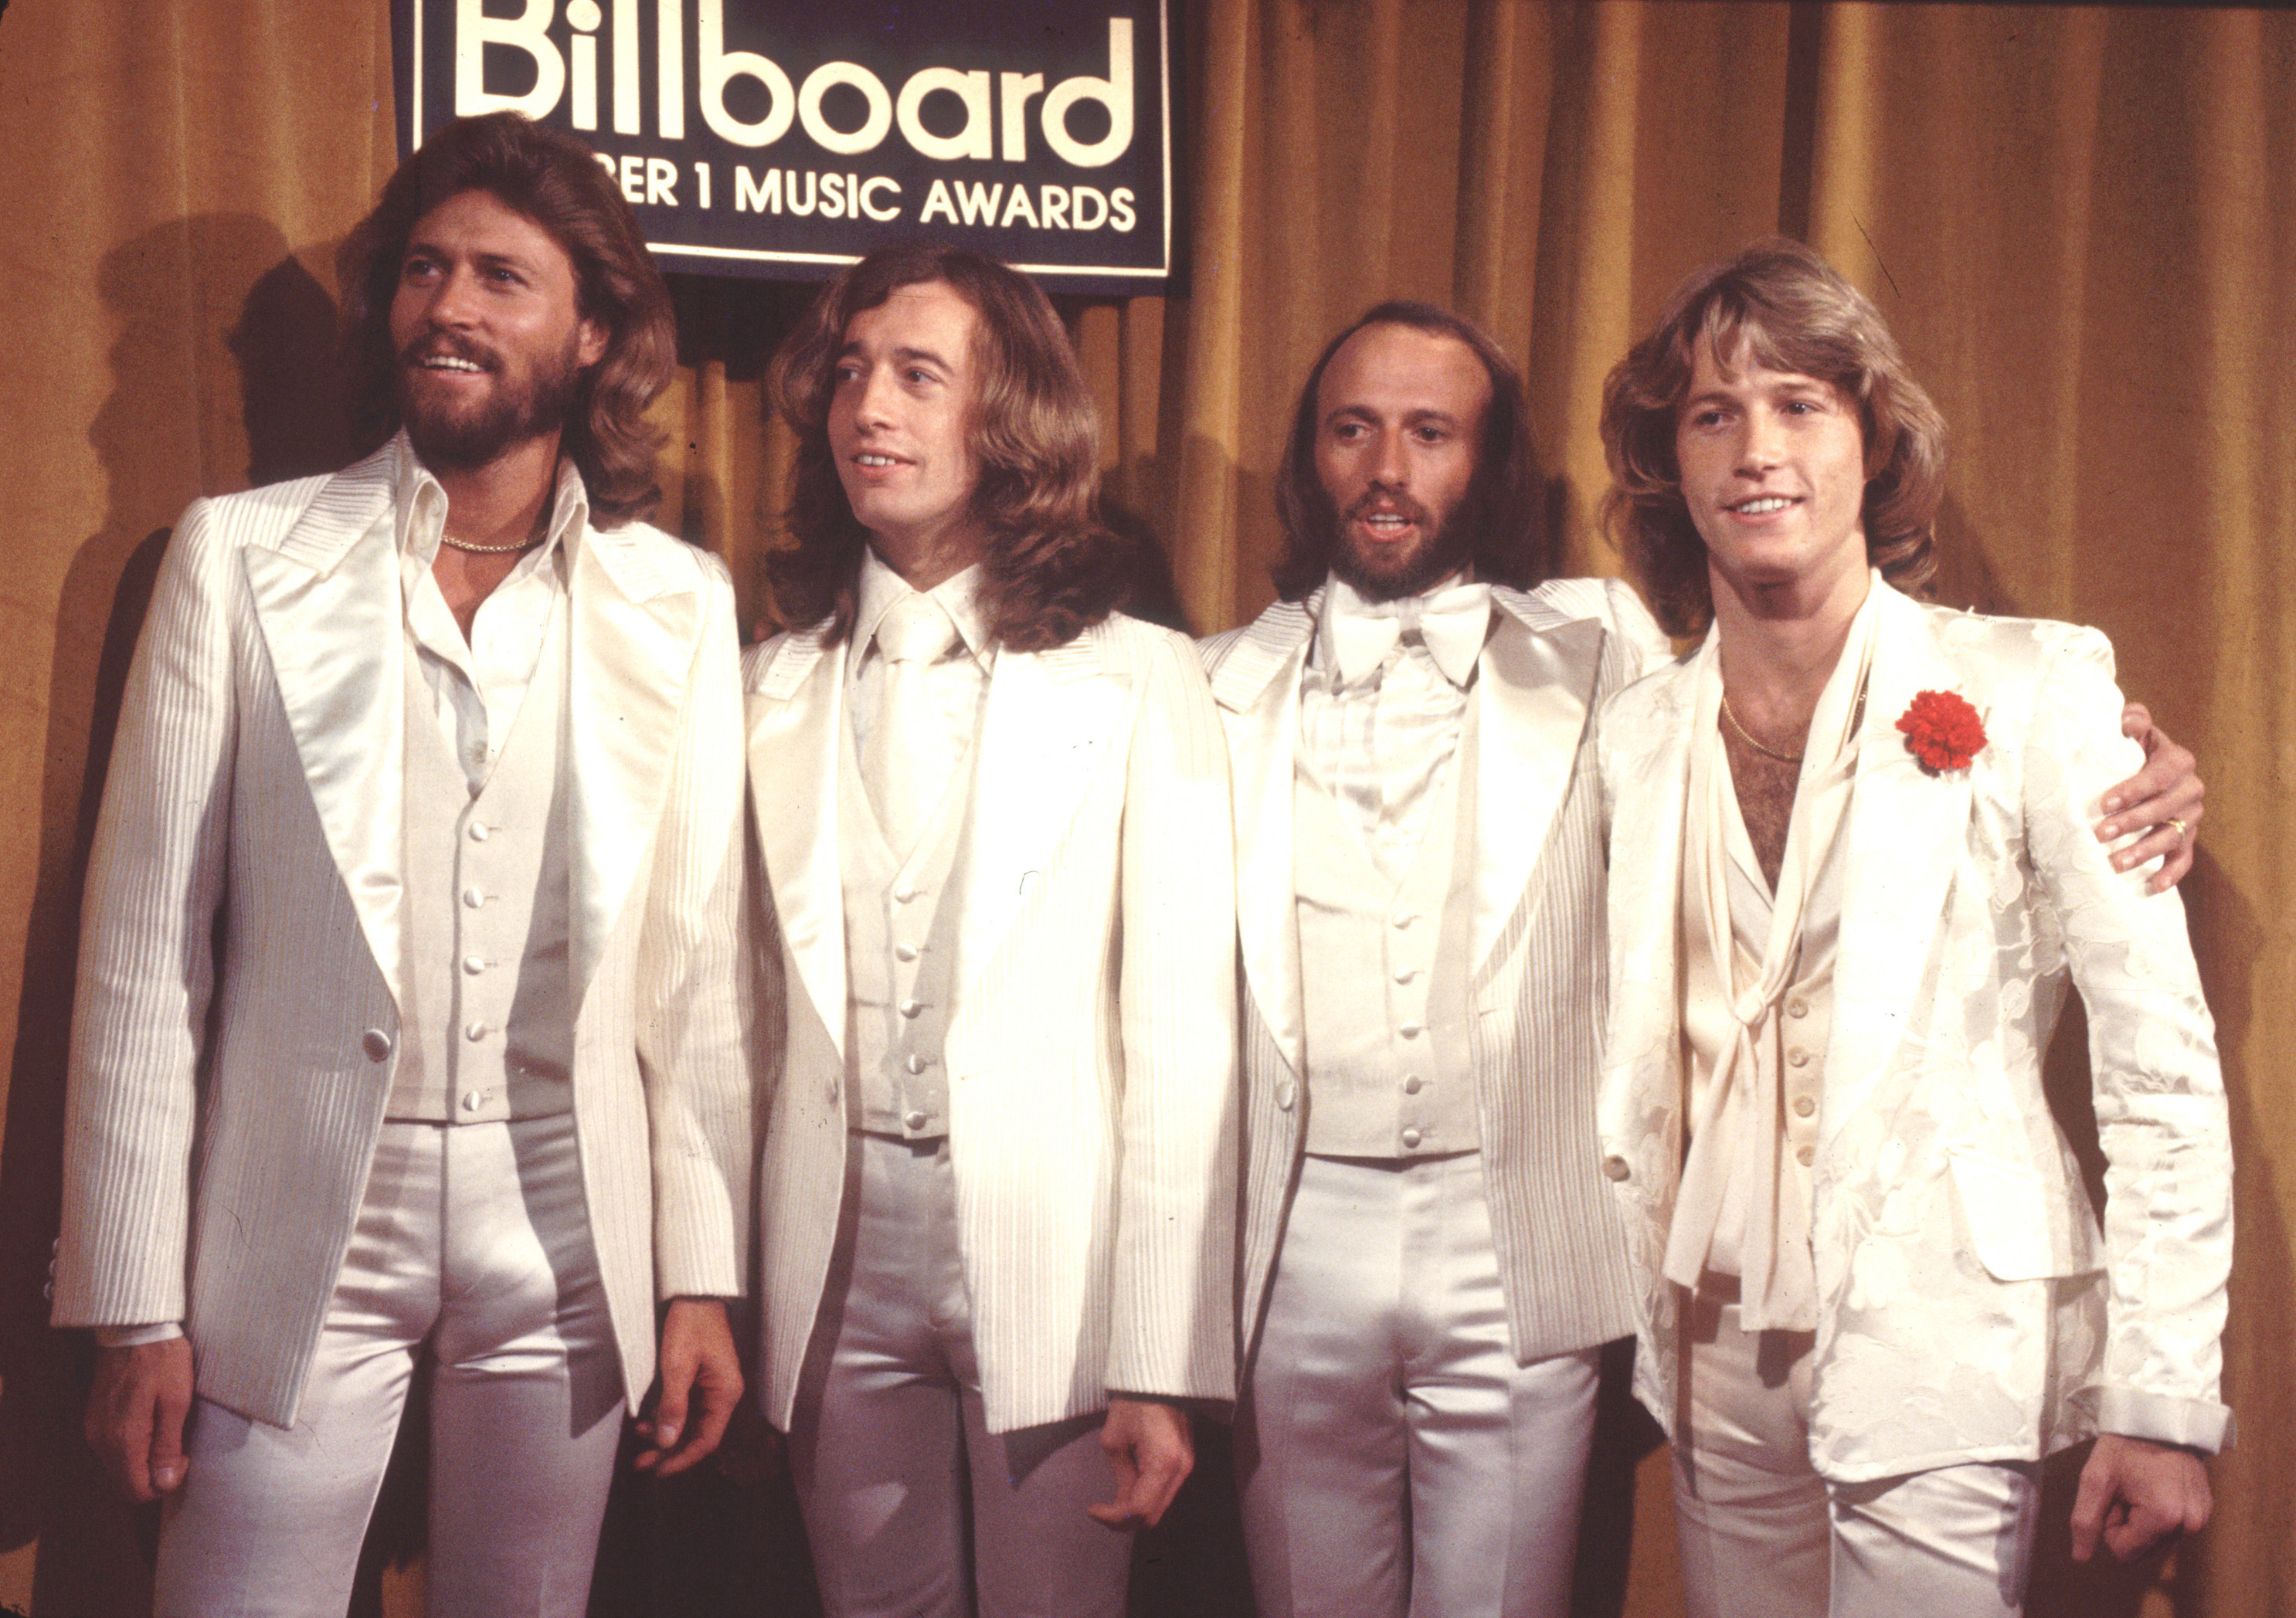 Barry Gibb, Robin Gibb, Maurice Gibb, and Andy Gibb at the Billboard Music Awards in 1977 | Source: Getty Images